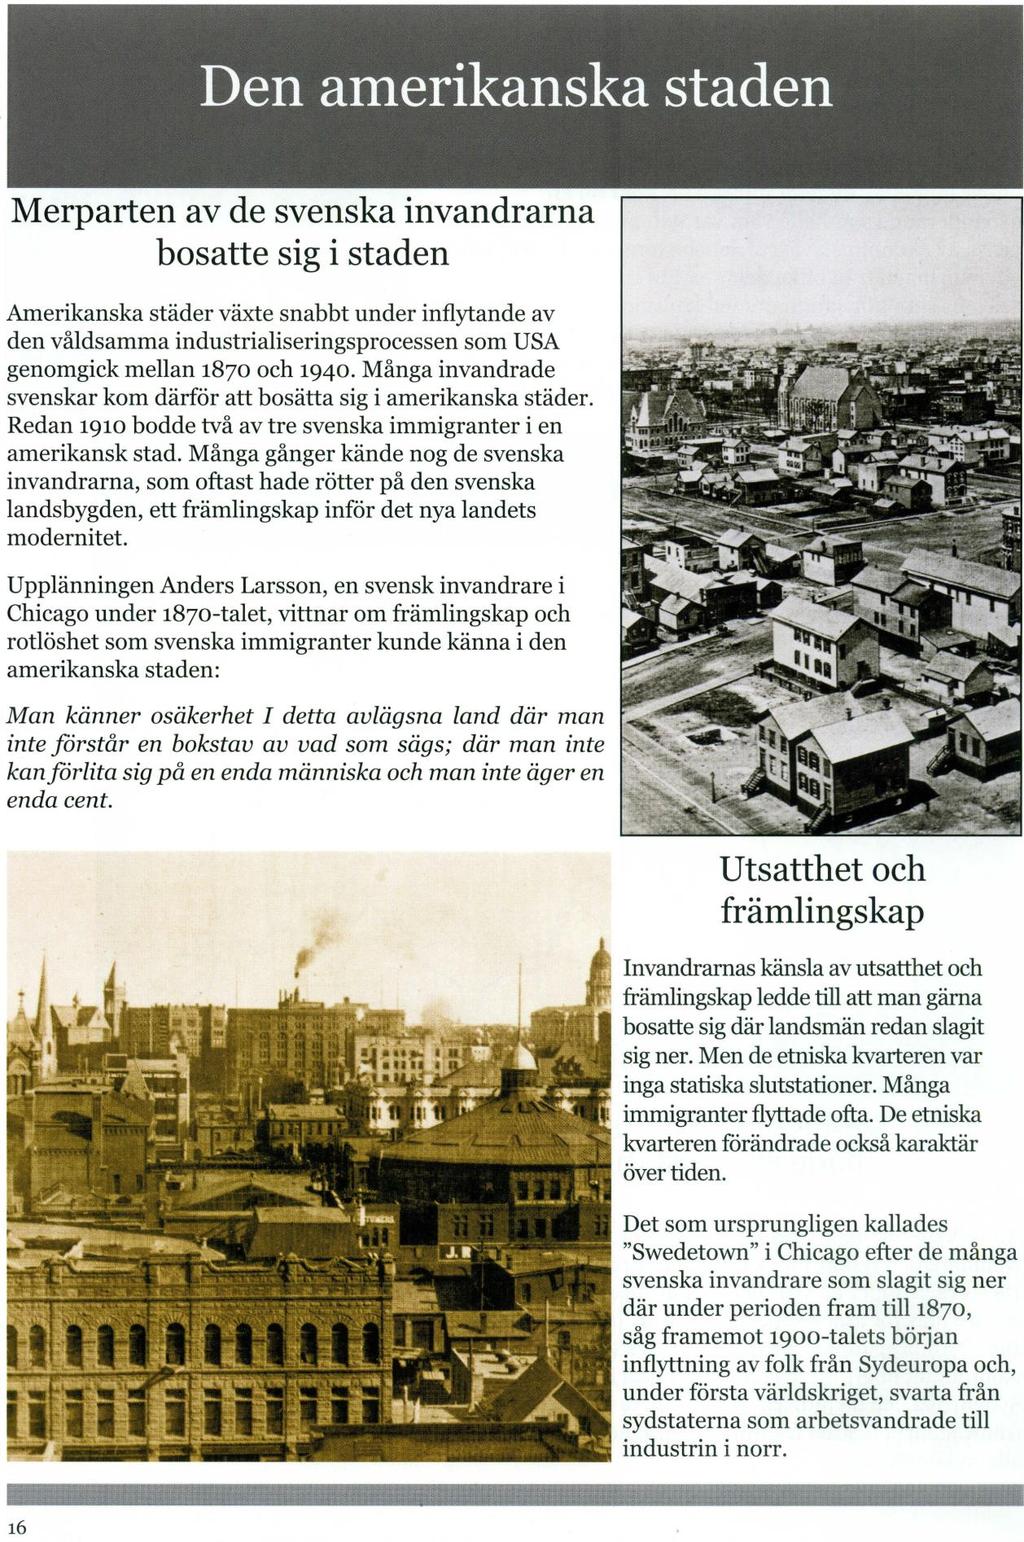 The American city The majority of the Swedish immigrants settled in cities American cities grew rapidly under the influence of the aggressive industrialization process that USA underwent during the